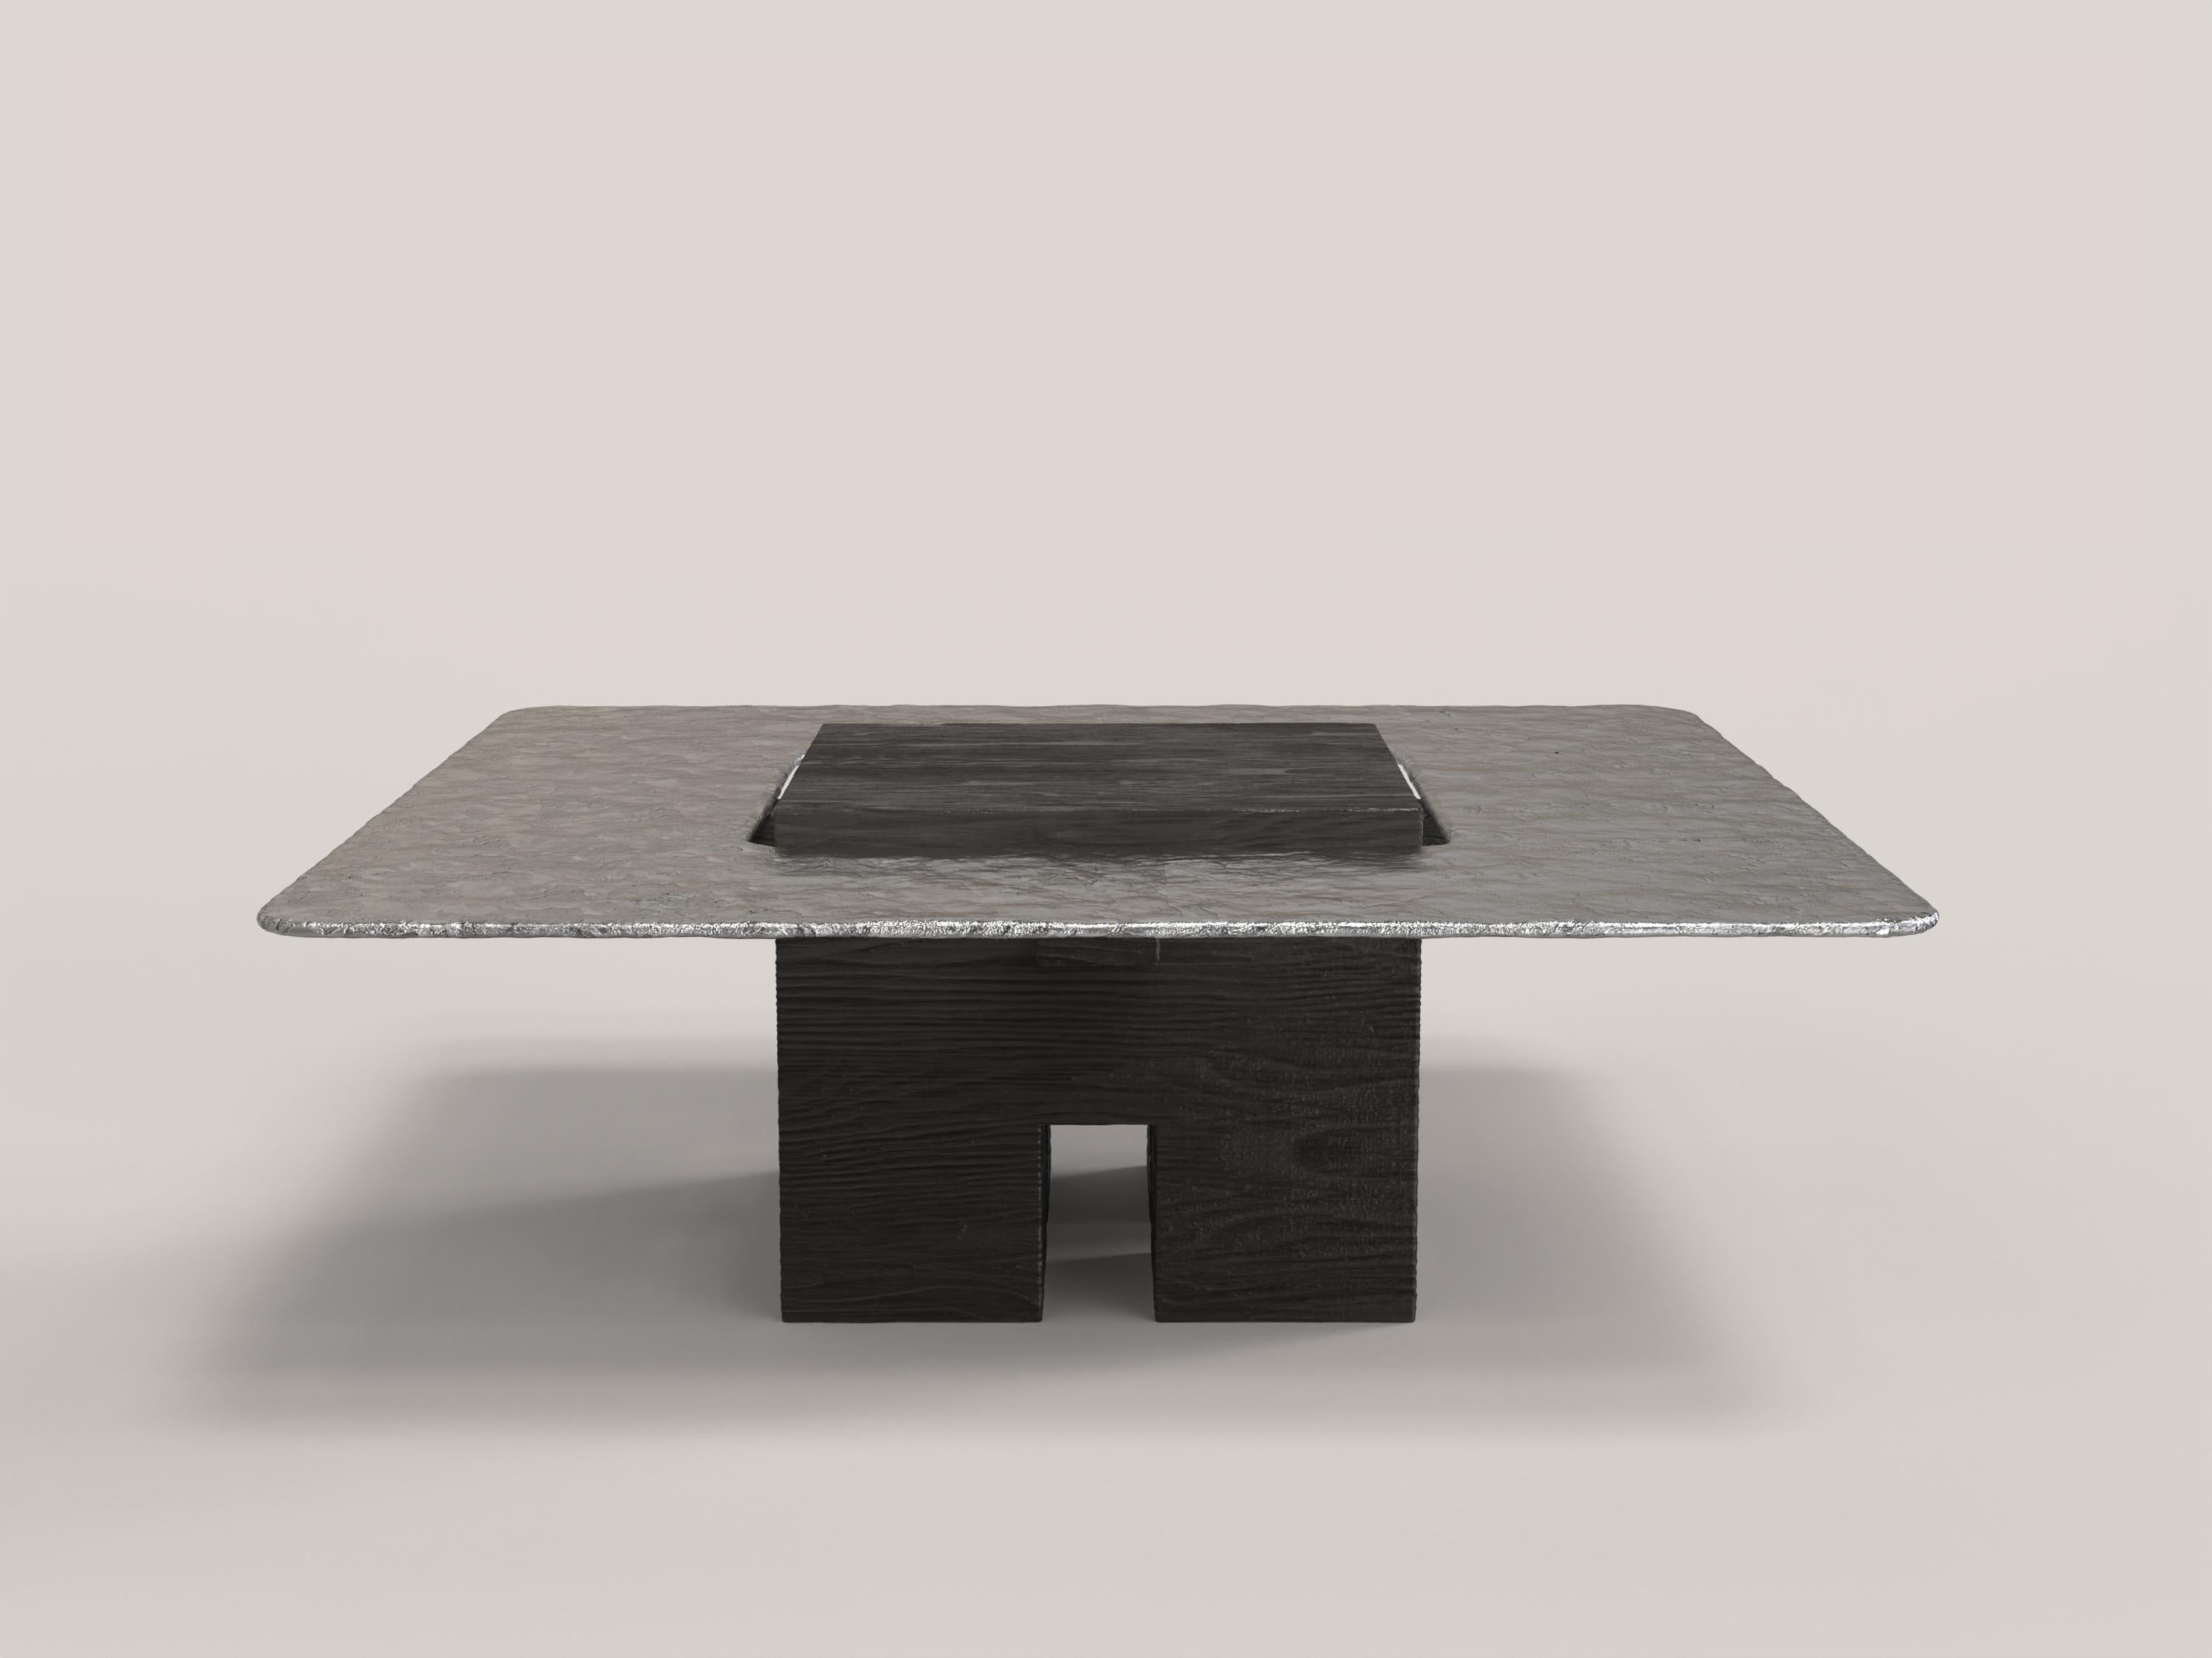 Tempio V2 is a 21st Century sculptural table made by Italian artisans in aluminium and black painted Oak wood. The piece is manufactured in a limited edition of 150 signed and progressively numbered examples. It is part of the collectible design